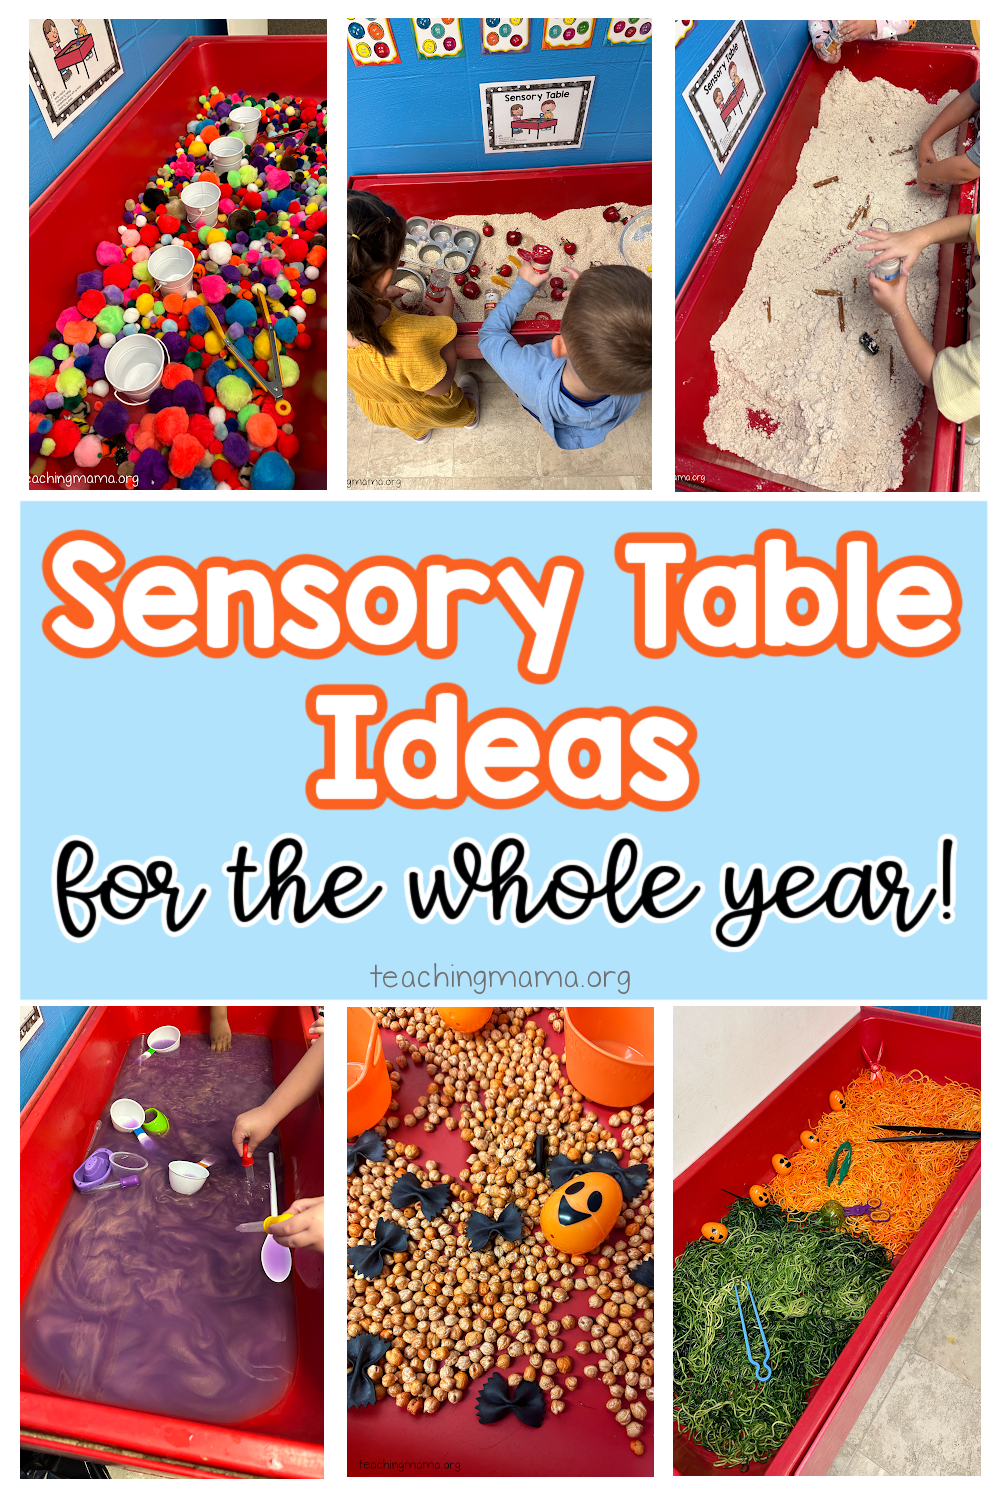 7 Amazing Benefits of a Sensory Table that Make Learning Fun - ABC